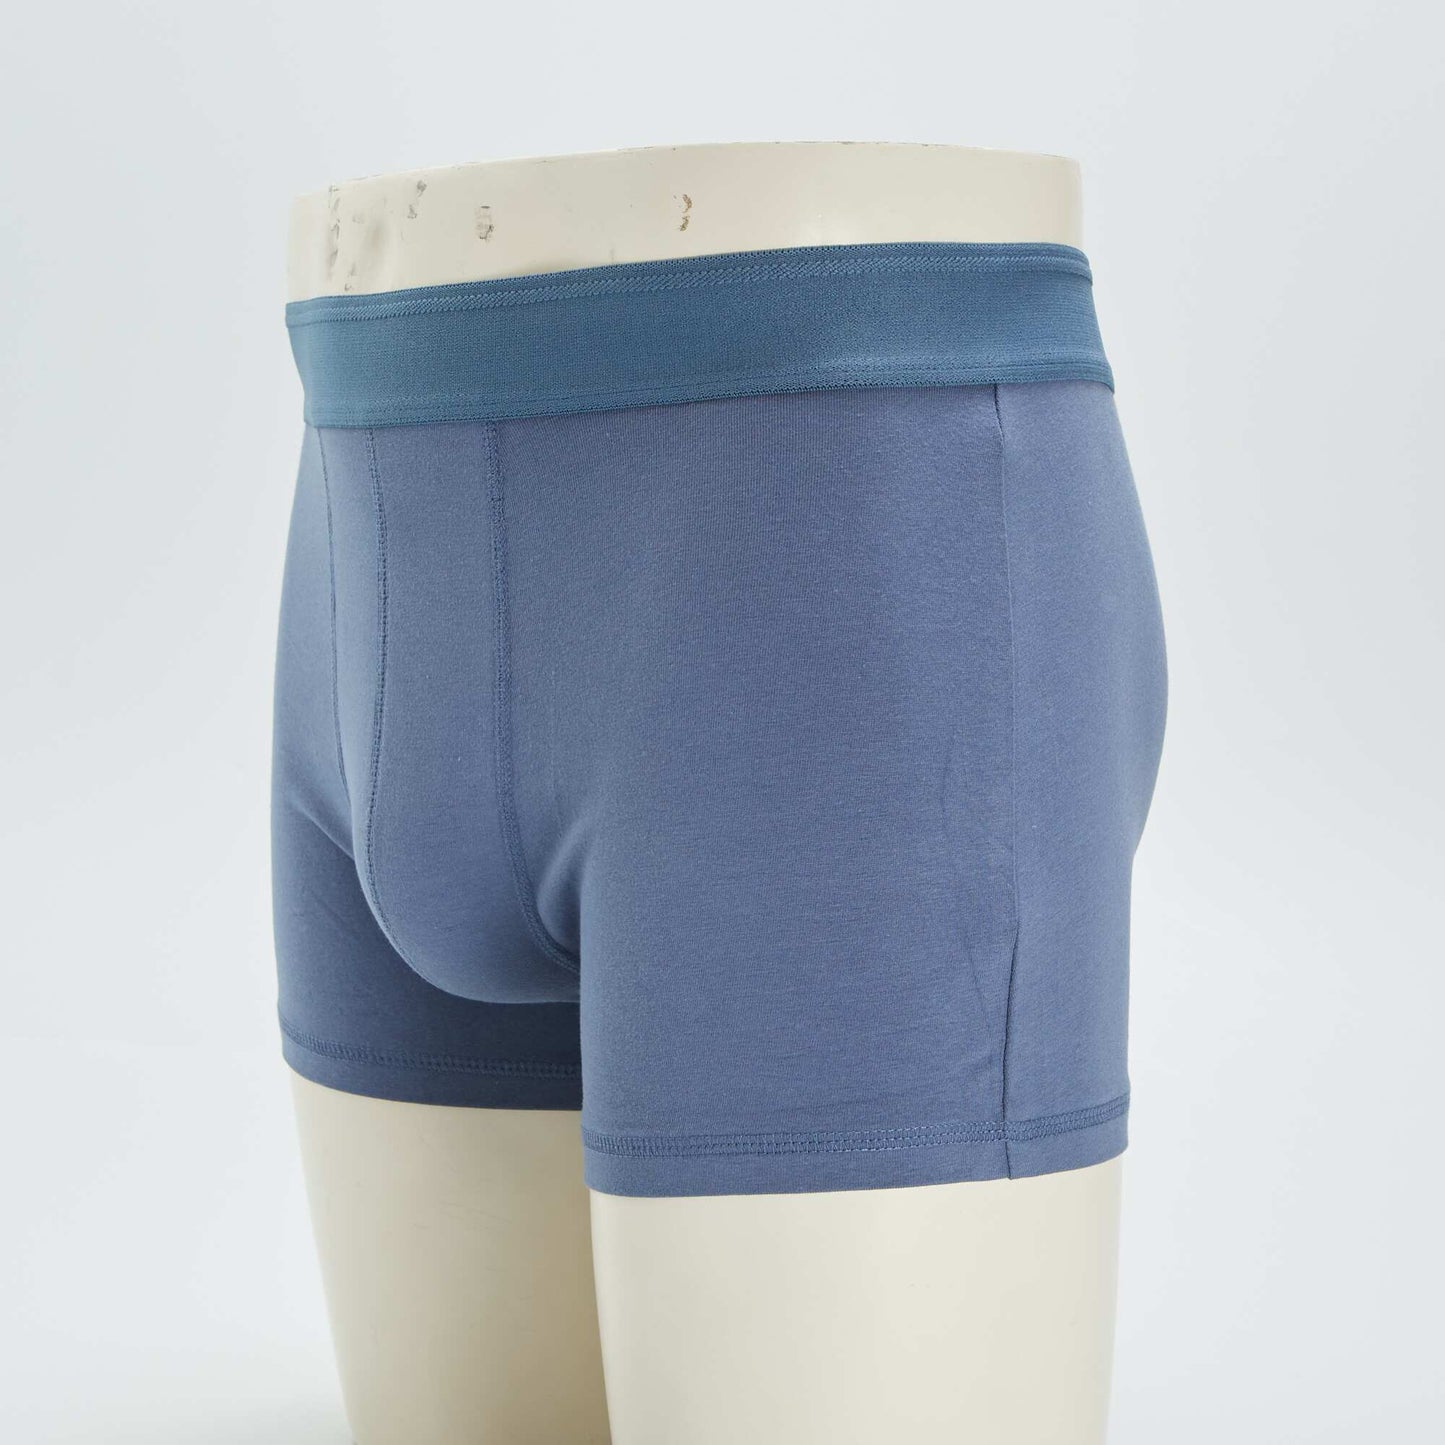 Pack of 3 plain boxers NAVYOCHRE